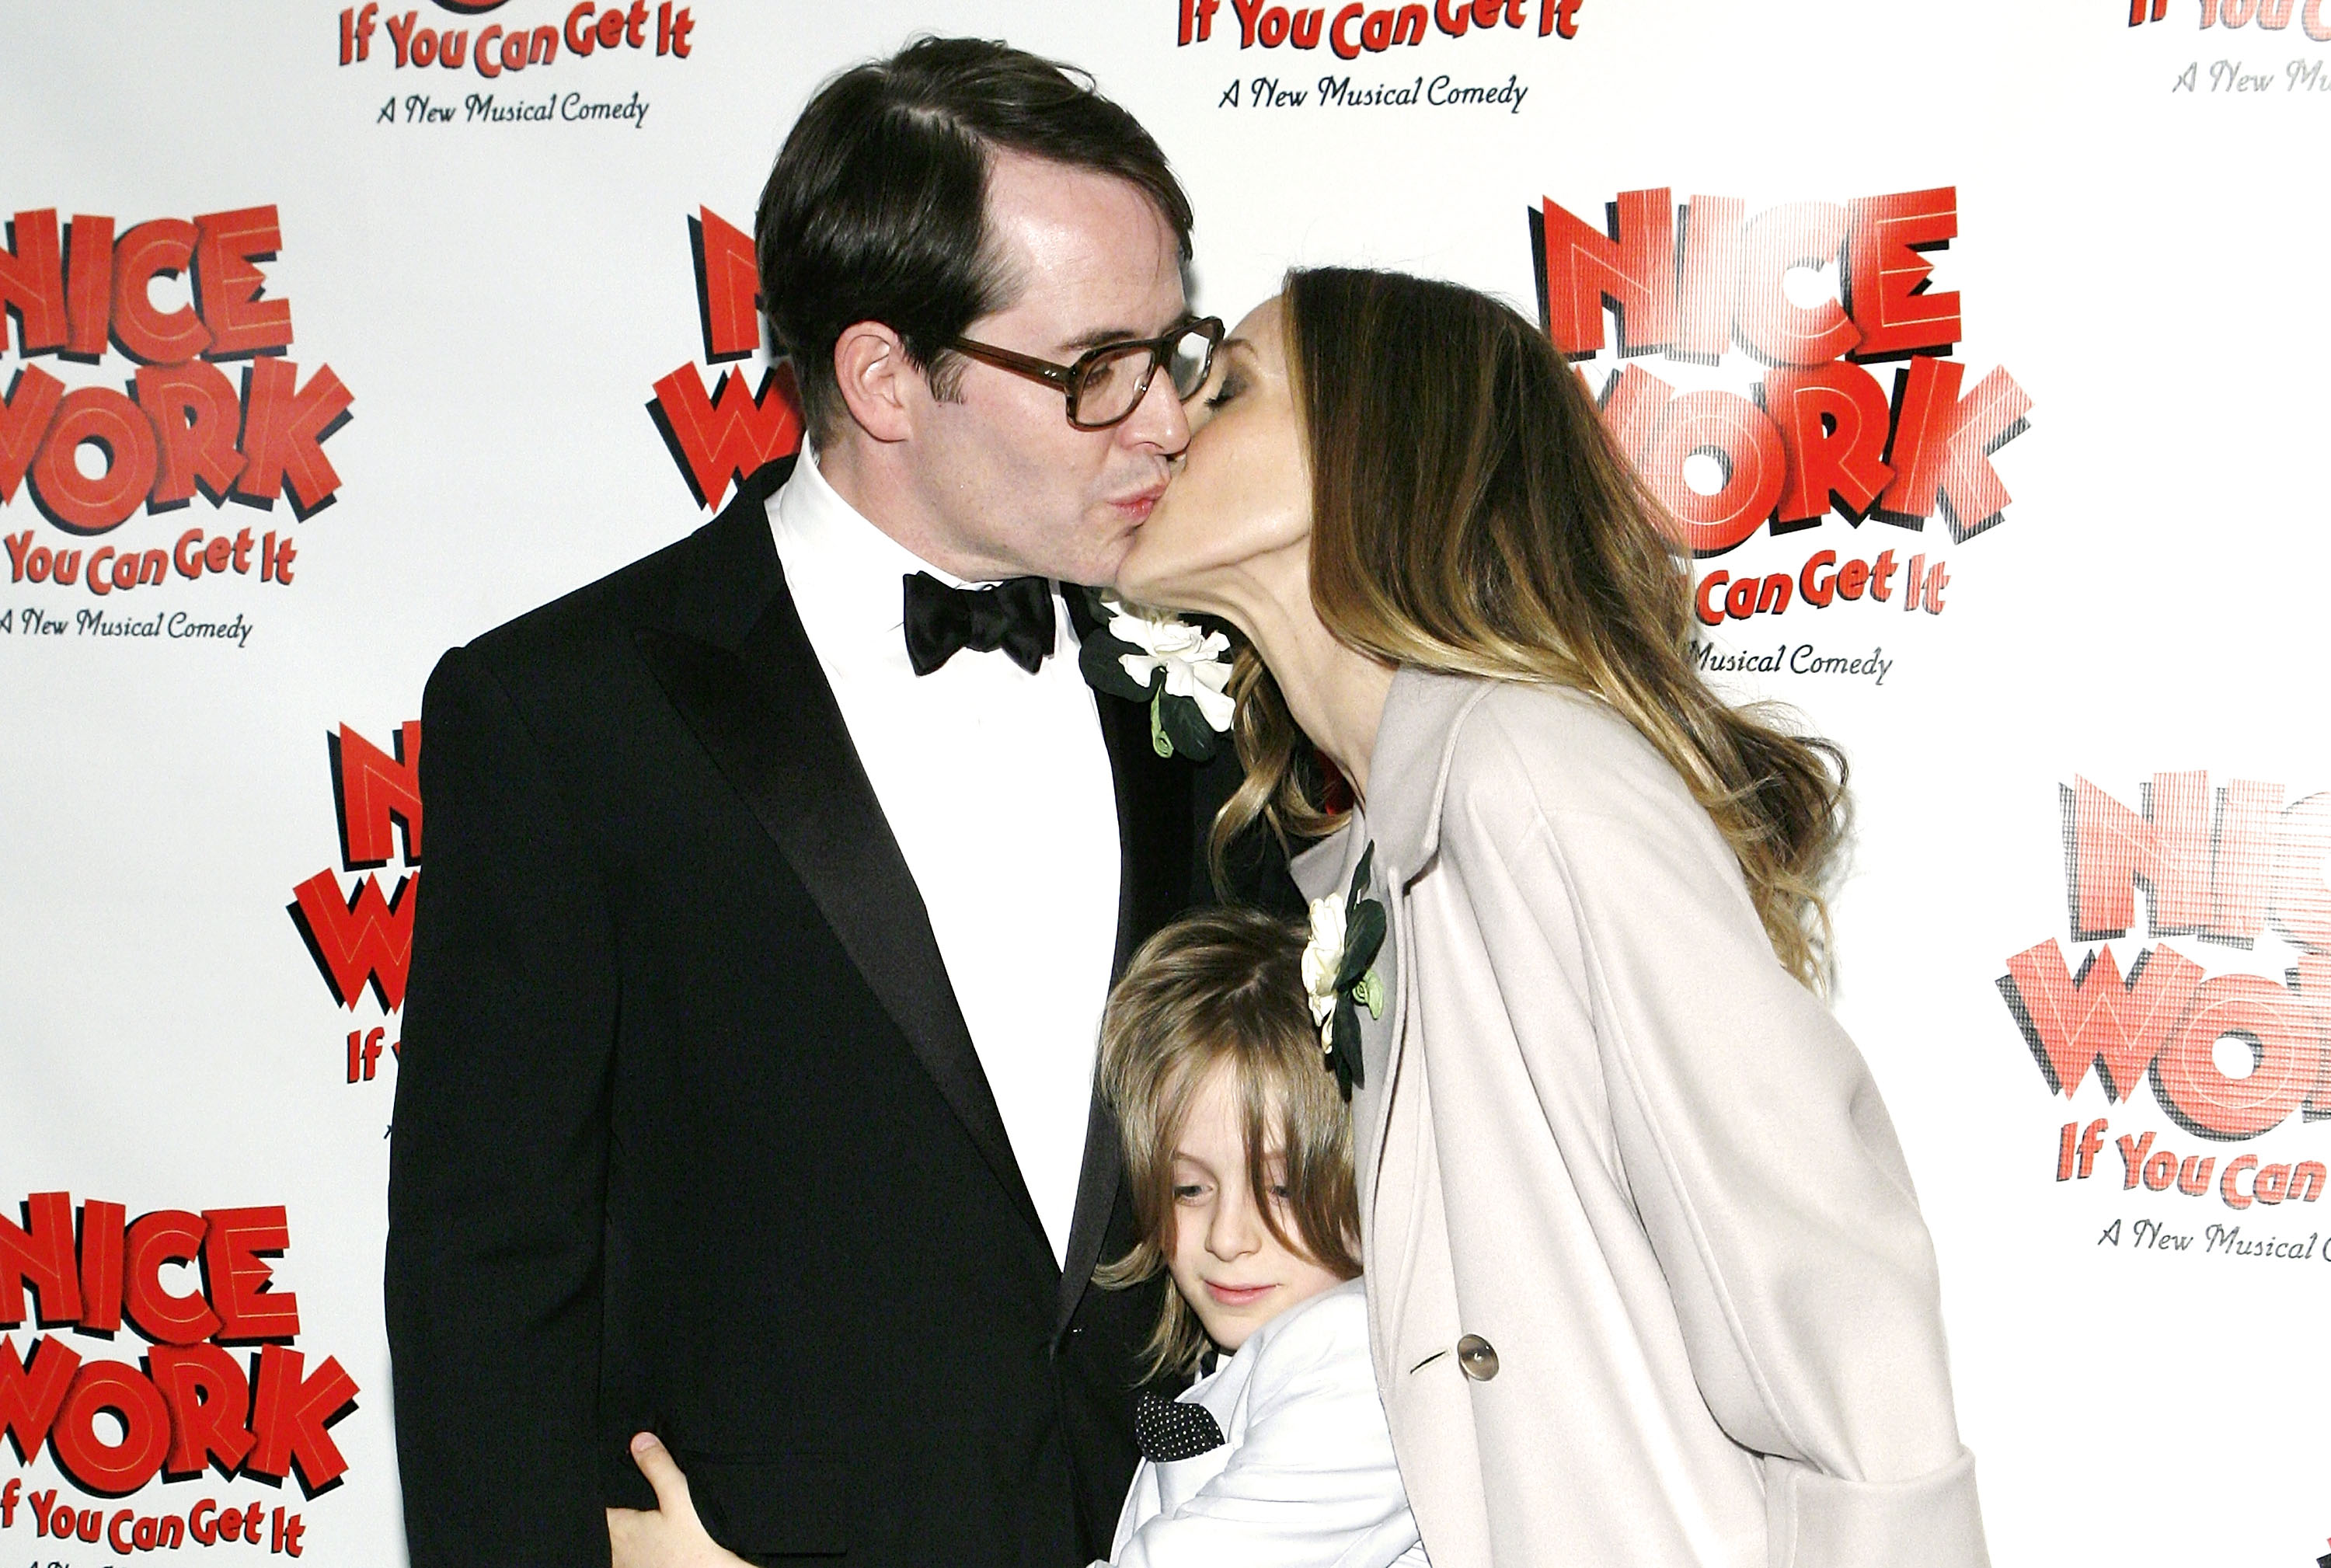 Matthew Broderick, James Broderick and Sarah Jessica Parker at the "Nice Work If You Can Get It" Broadway opening night after-party at the Marriott Marquis Hotel on April 24, 2012 in New York City | Source: Getty Images